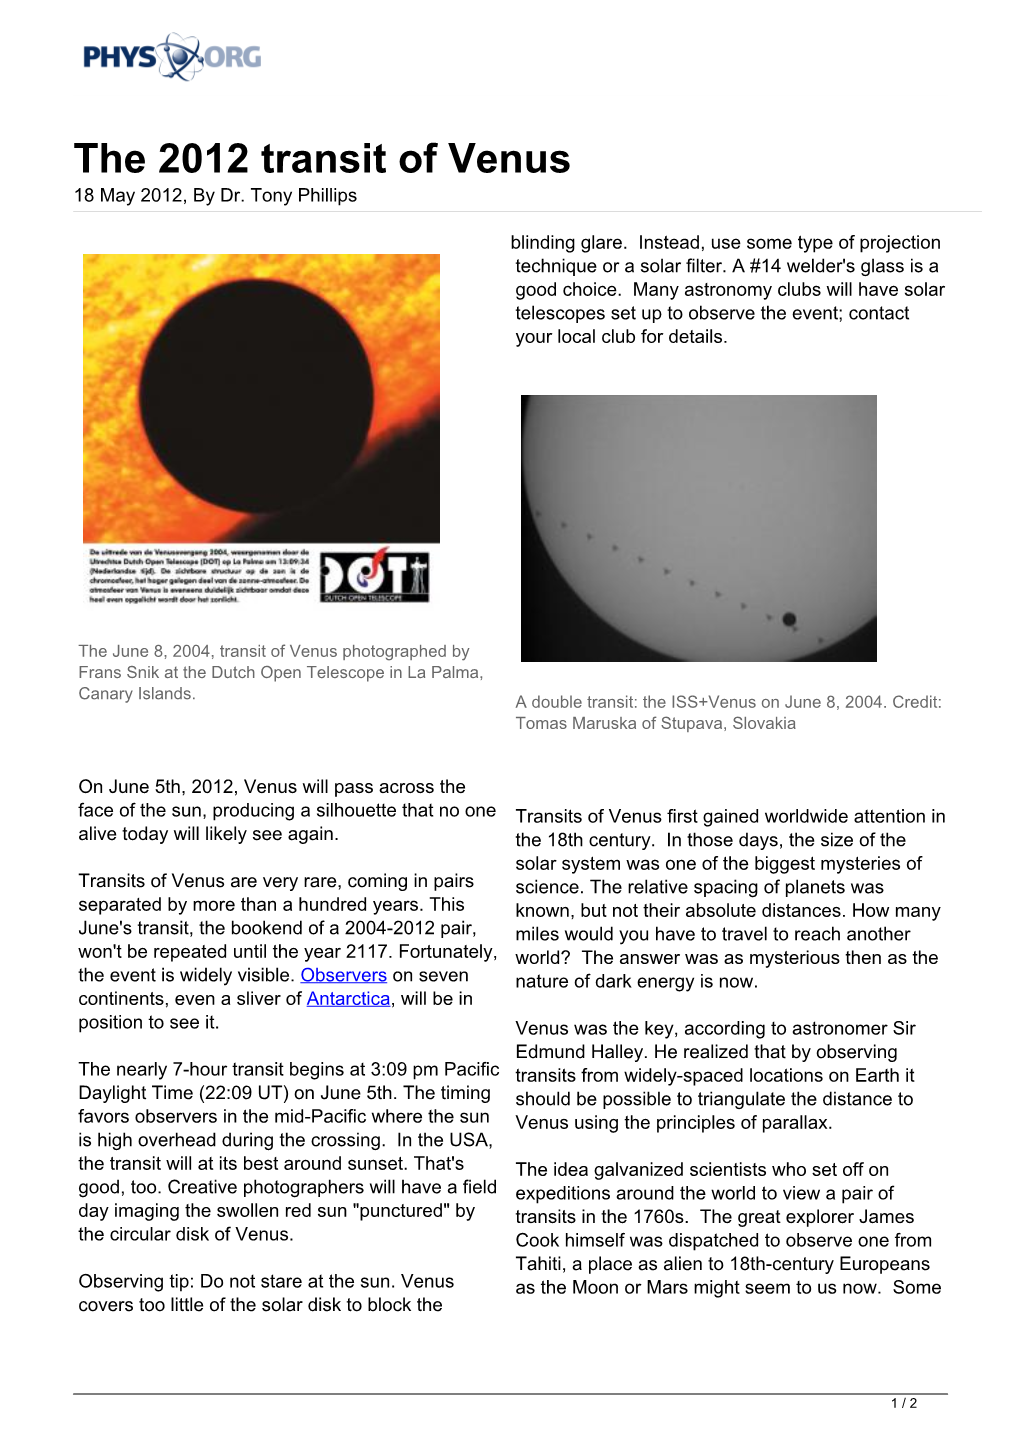 The 2012 Transit of Venus 18 May 2012, by Dr